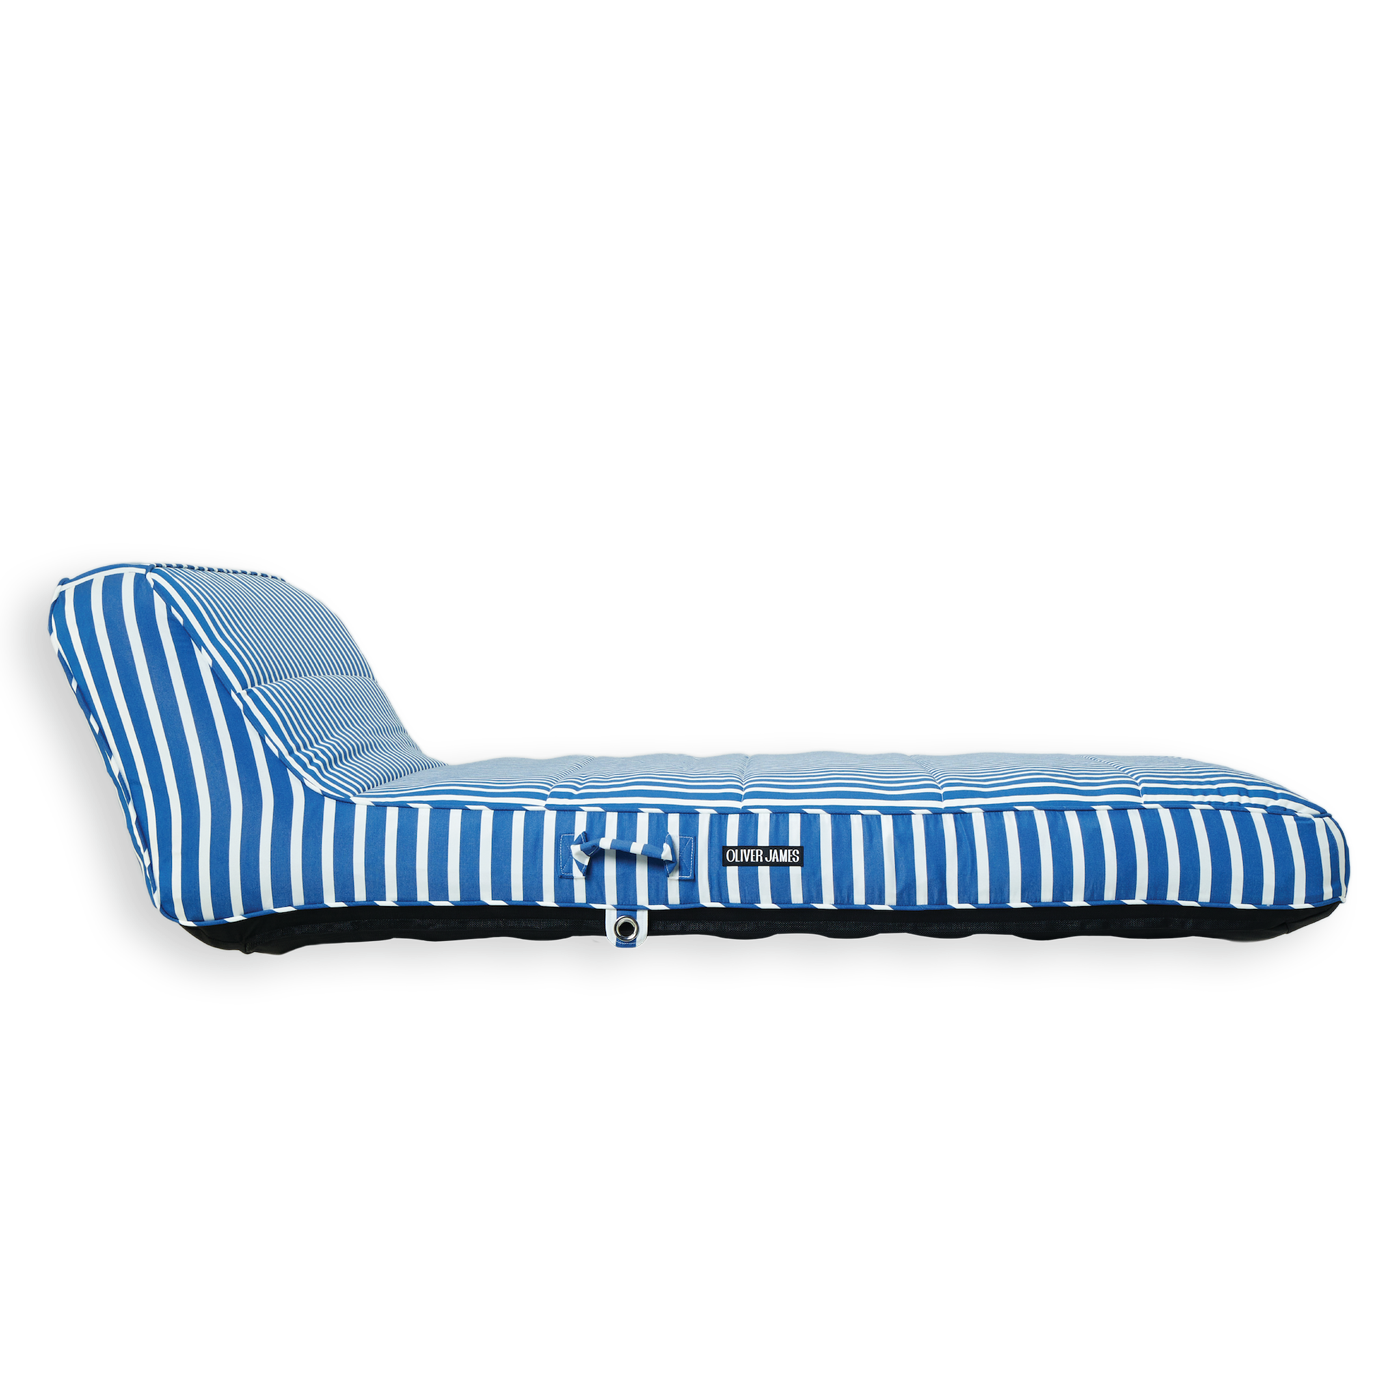 The side profile and backrest angle of a double blue and white stripe luxury pool float.